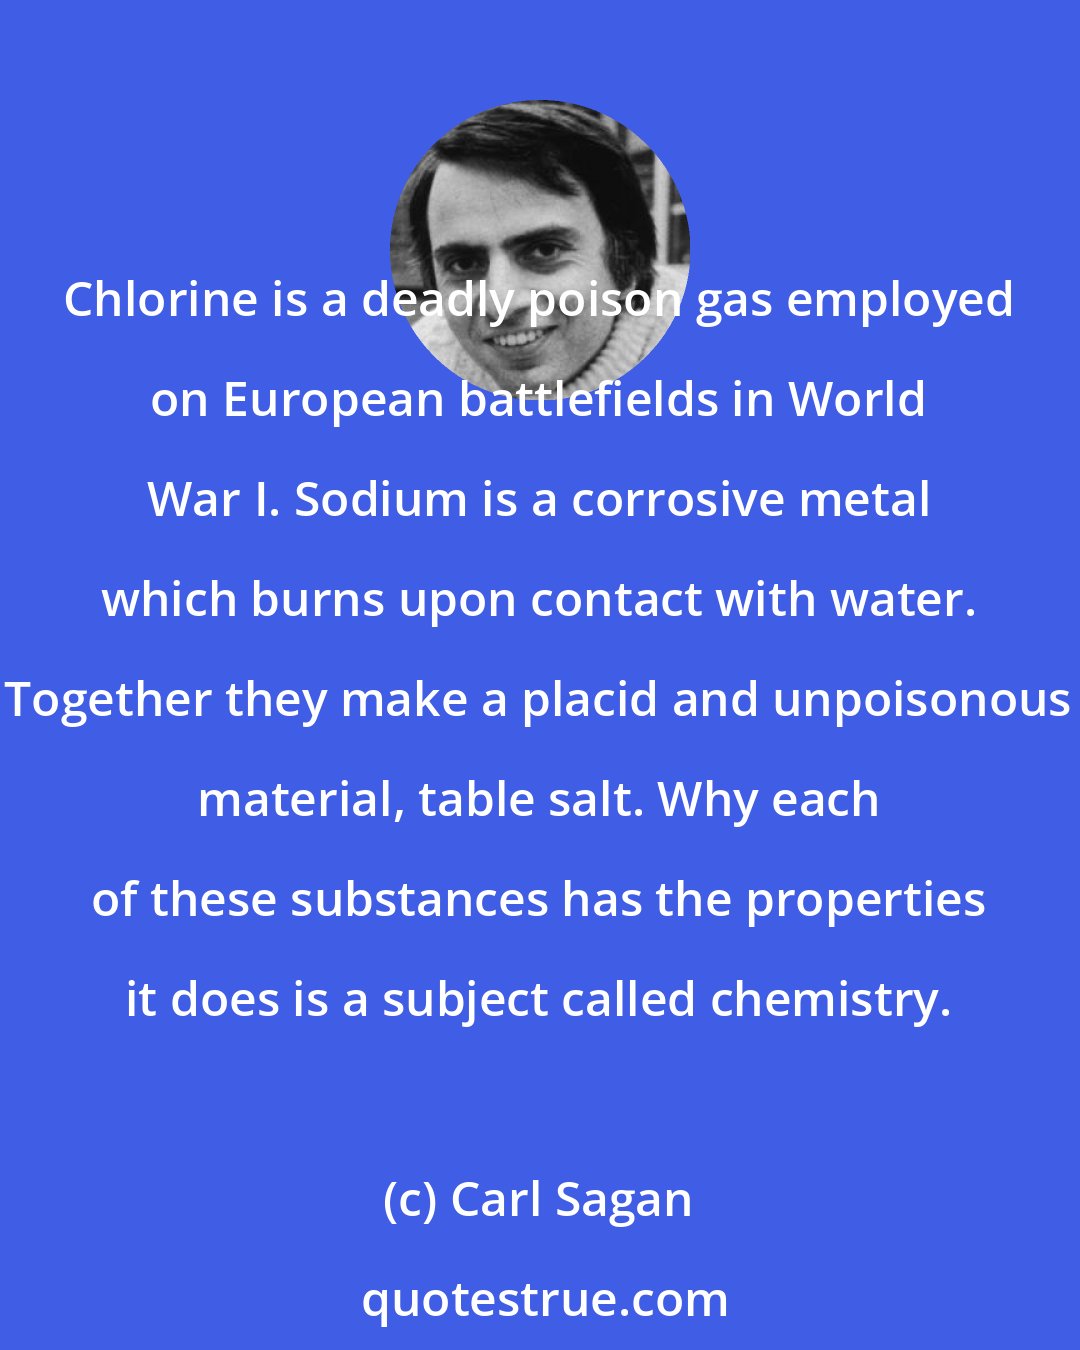 Carl Sagan: Chlorine is a deadly poison gas employed on European battlefields in World War I. Sodium is a corrosive metal which burns upon contact with water. Together they make a placid and unpoisonous material, table salt. Why each of these substances has the properties it does is a subject called chemistry.